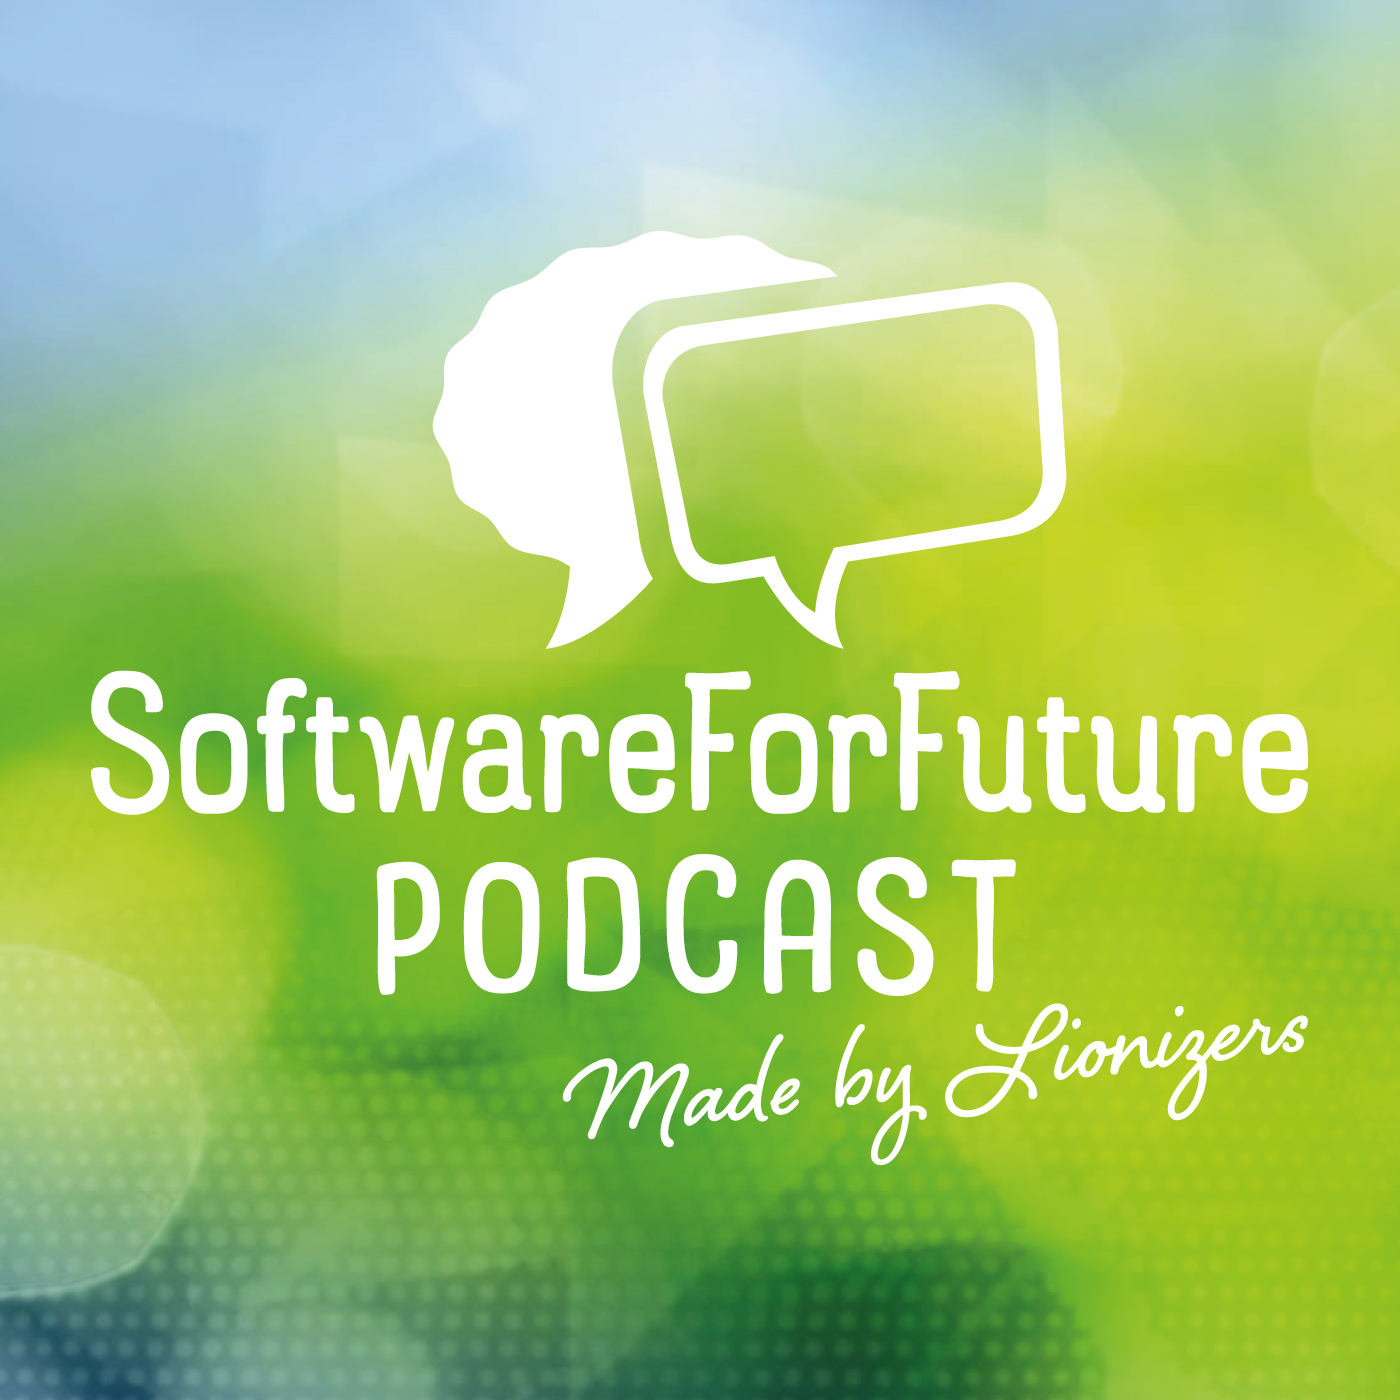 SoftwareForFuture PODCAST Made by Lionizers